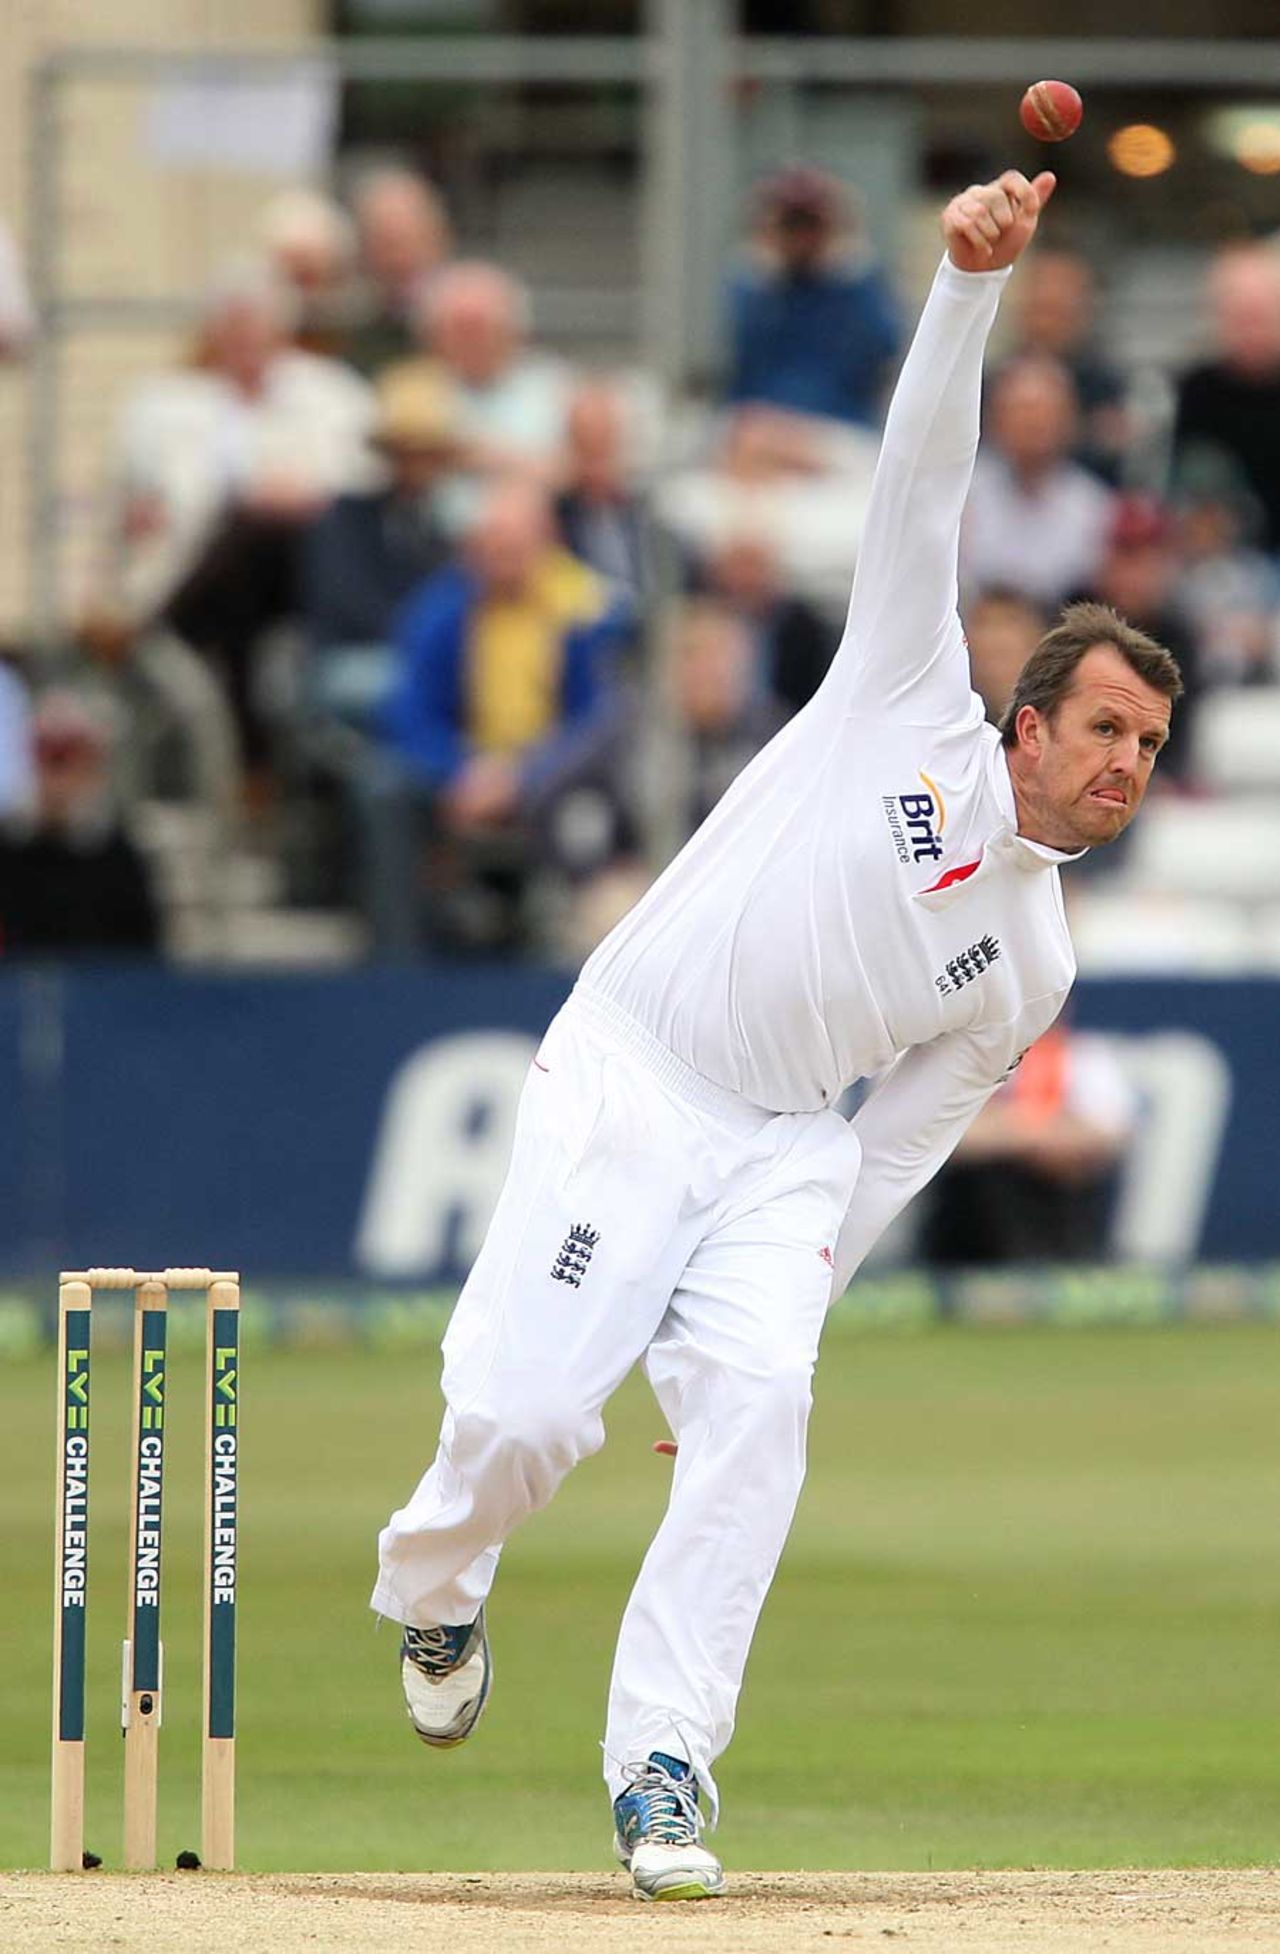 Graeme Swann was back bowling on the third morning, Essex v England, 3rd day, Chelmsford, July 2, 2013